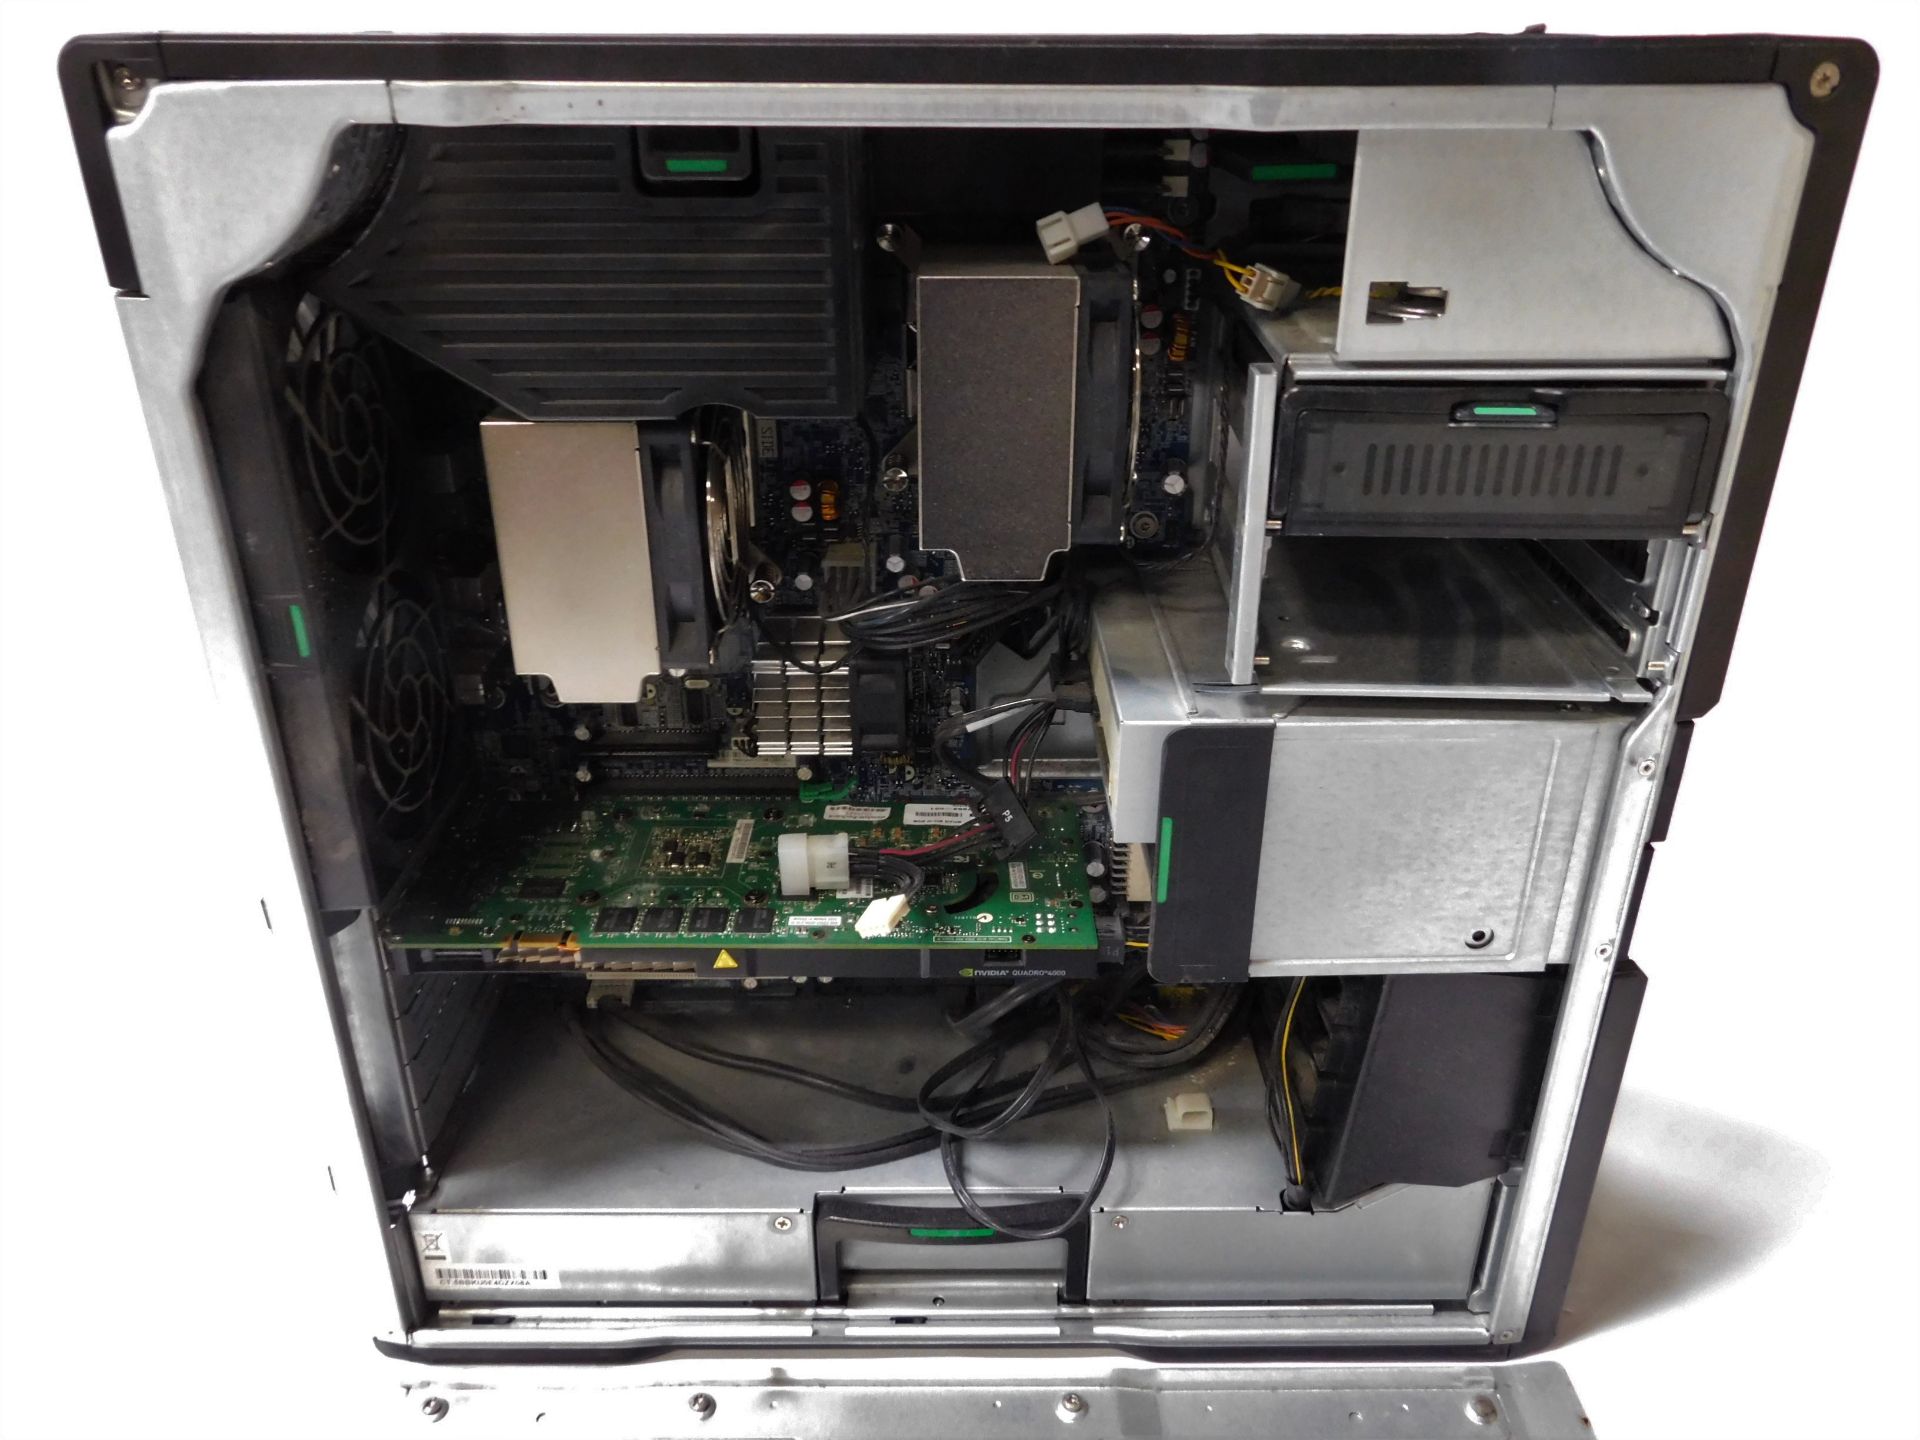 HP Z600 Xeon CPU X5650 Workstation, 2.67 GHz with 24 GB RAM & Quadro 4000 Video Card (Location - Image 2 of 3